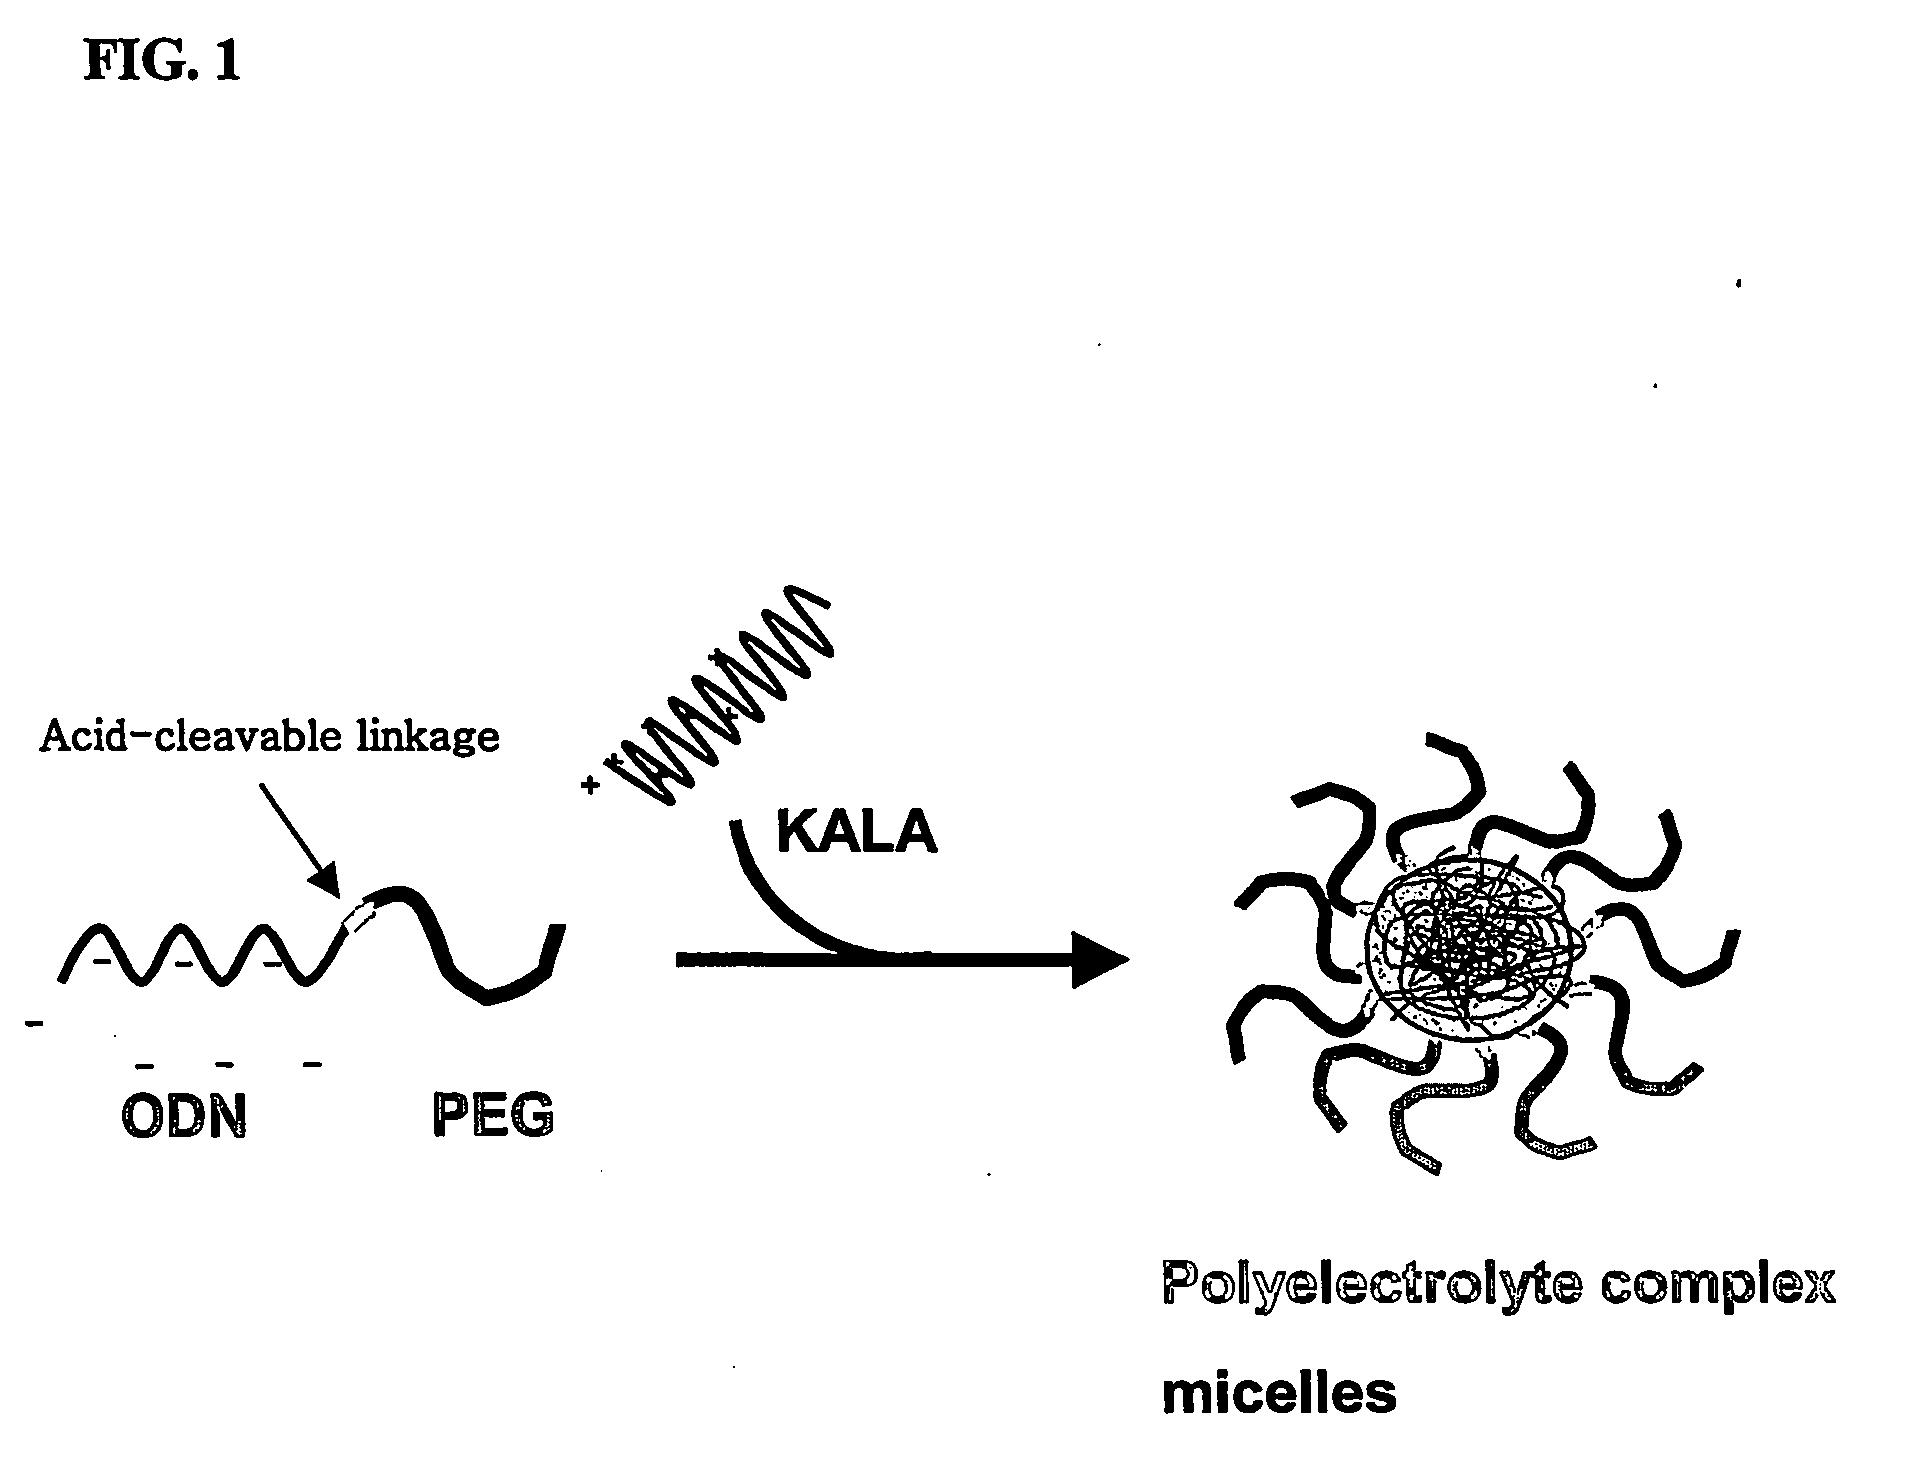 Conjugate for gene transfer comprising oligonucleotide and hydrophilic polymer, polyelectrolyte complex micelles formed from the conjugate, and methods for preparation thereof